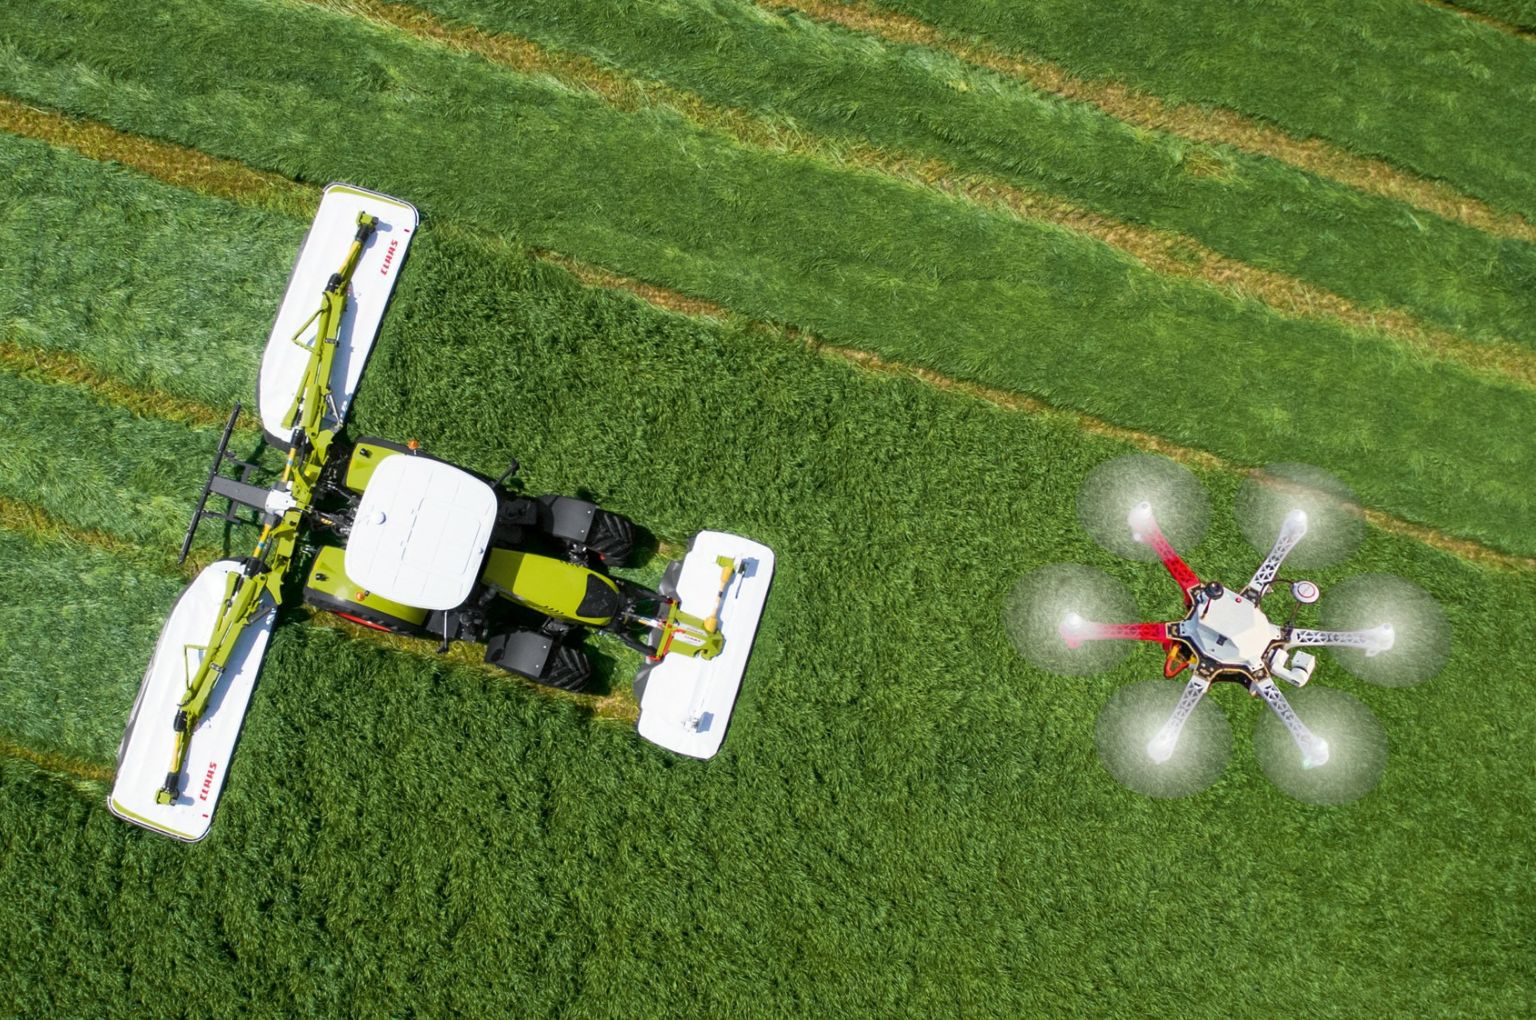 Claas drone technology